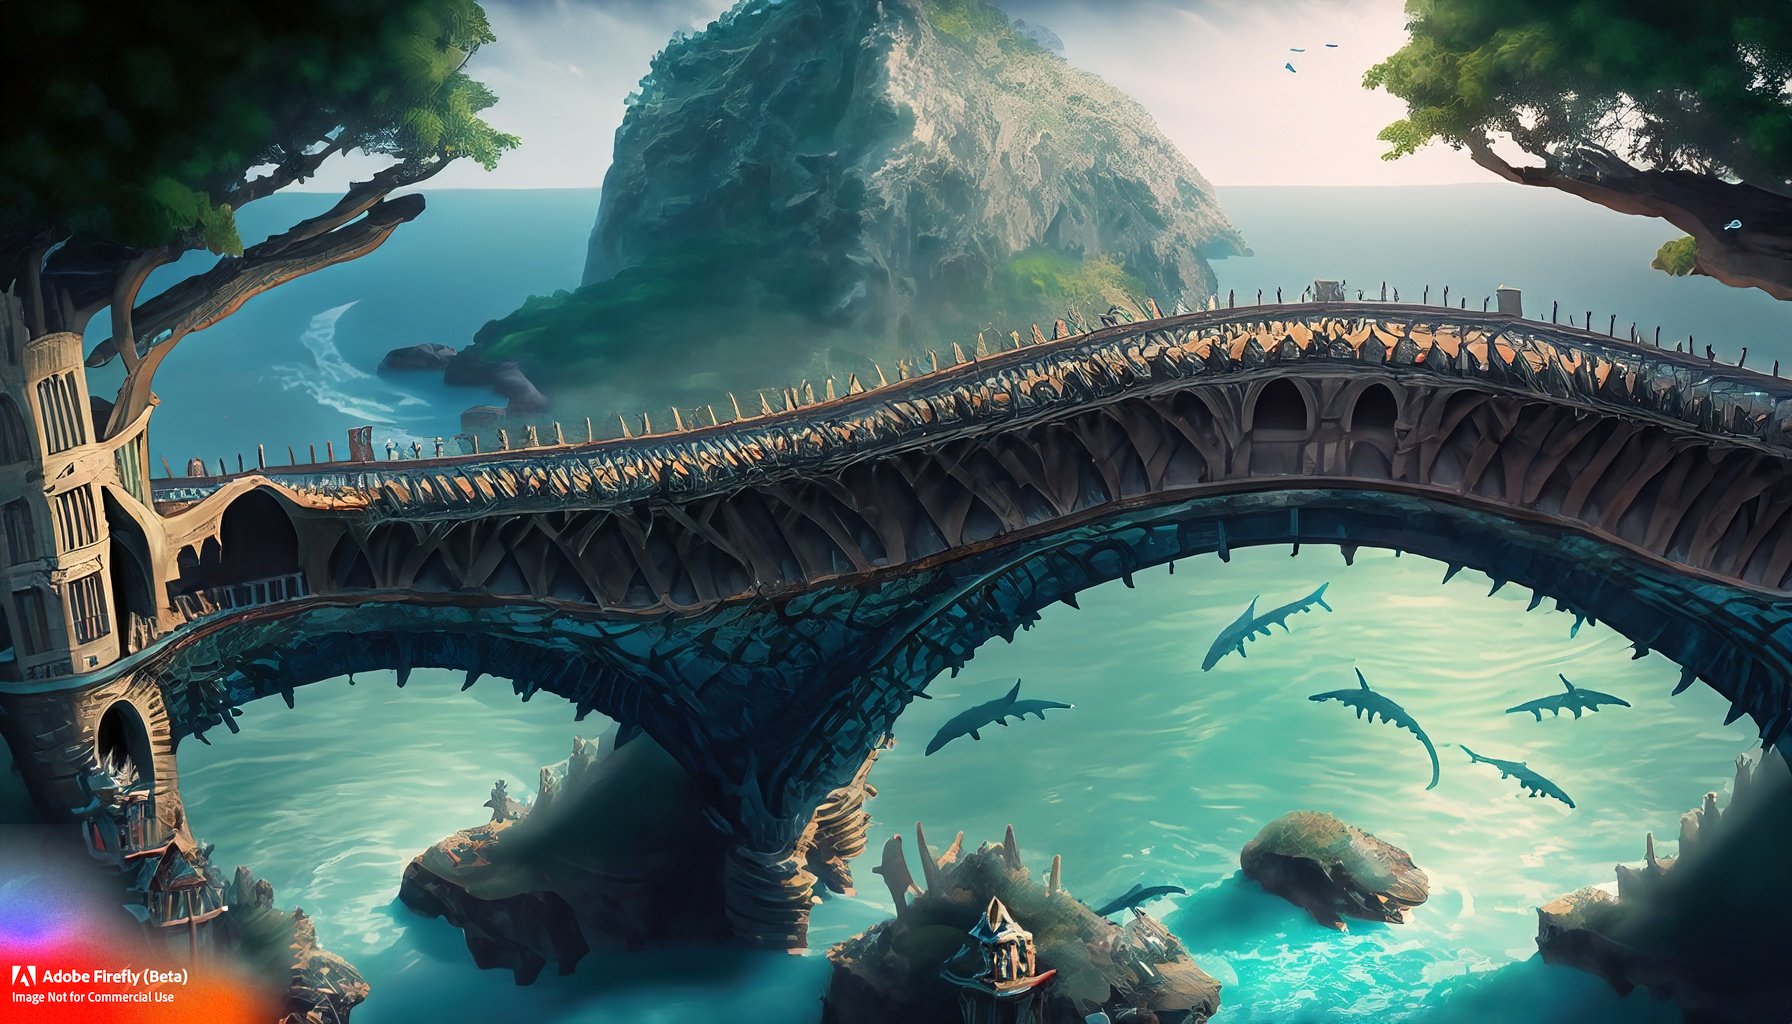 Firefly_A+Bridge Kingdom, a massive enclosed and fortified fantasy bridge over a sea, there are sharks in the sea, tropical islands are at different points along the bridge._art,fantasy,shot_from_above_6.jpg